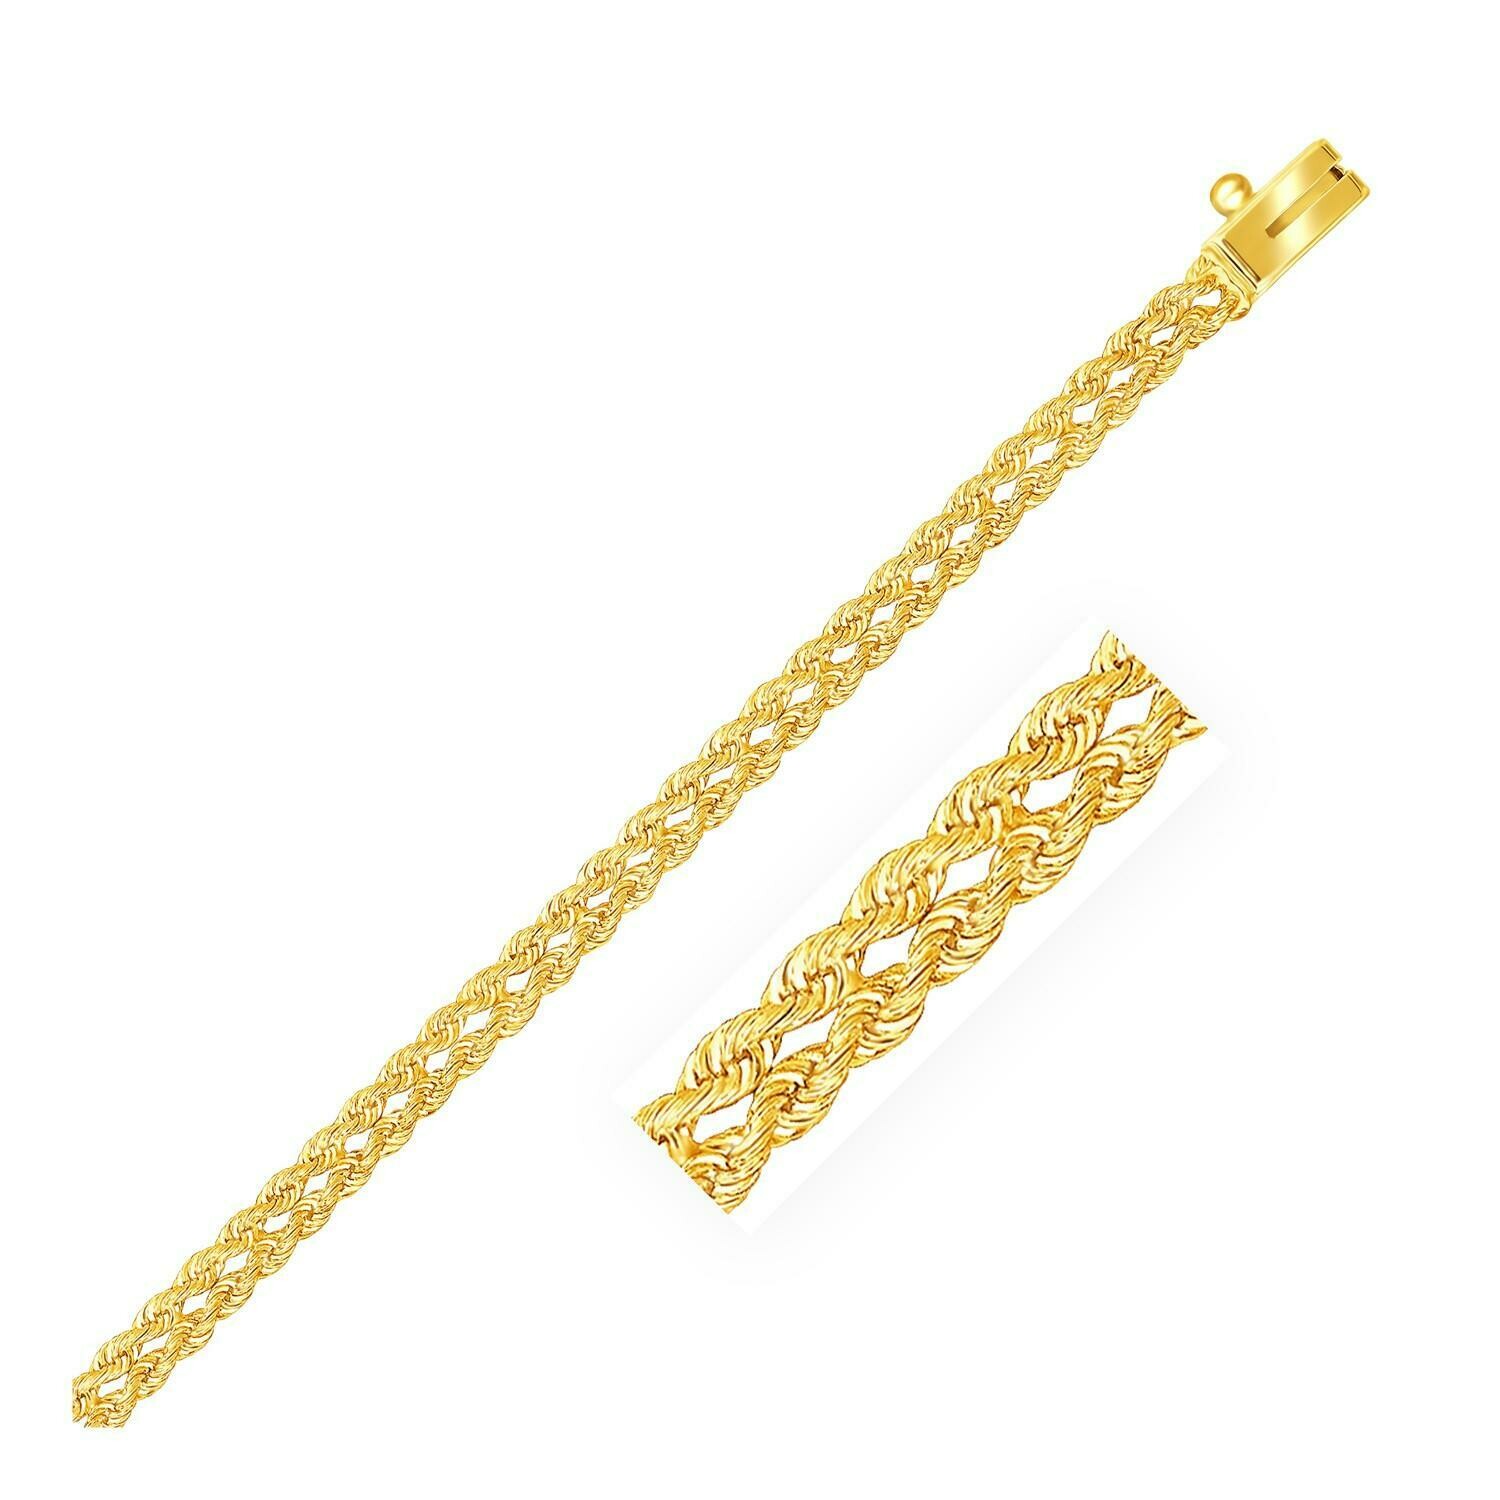 3.0 mm 14k Yellow Gold Two Row Rope Bracelet, Size: 7&quot;